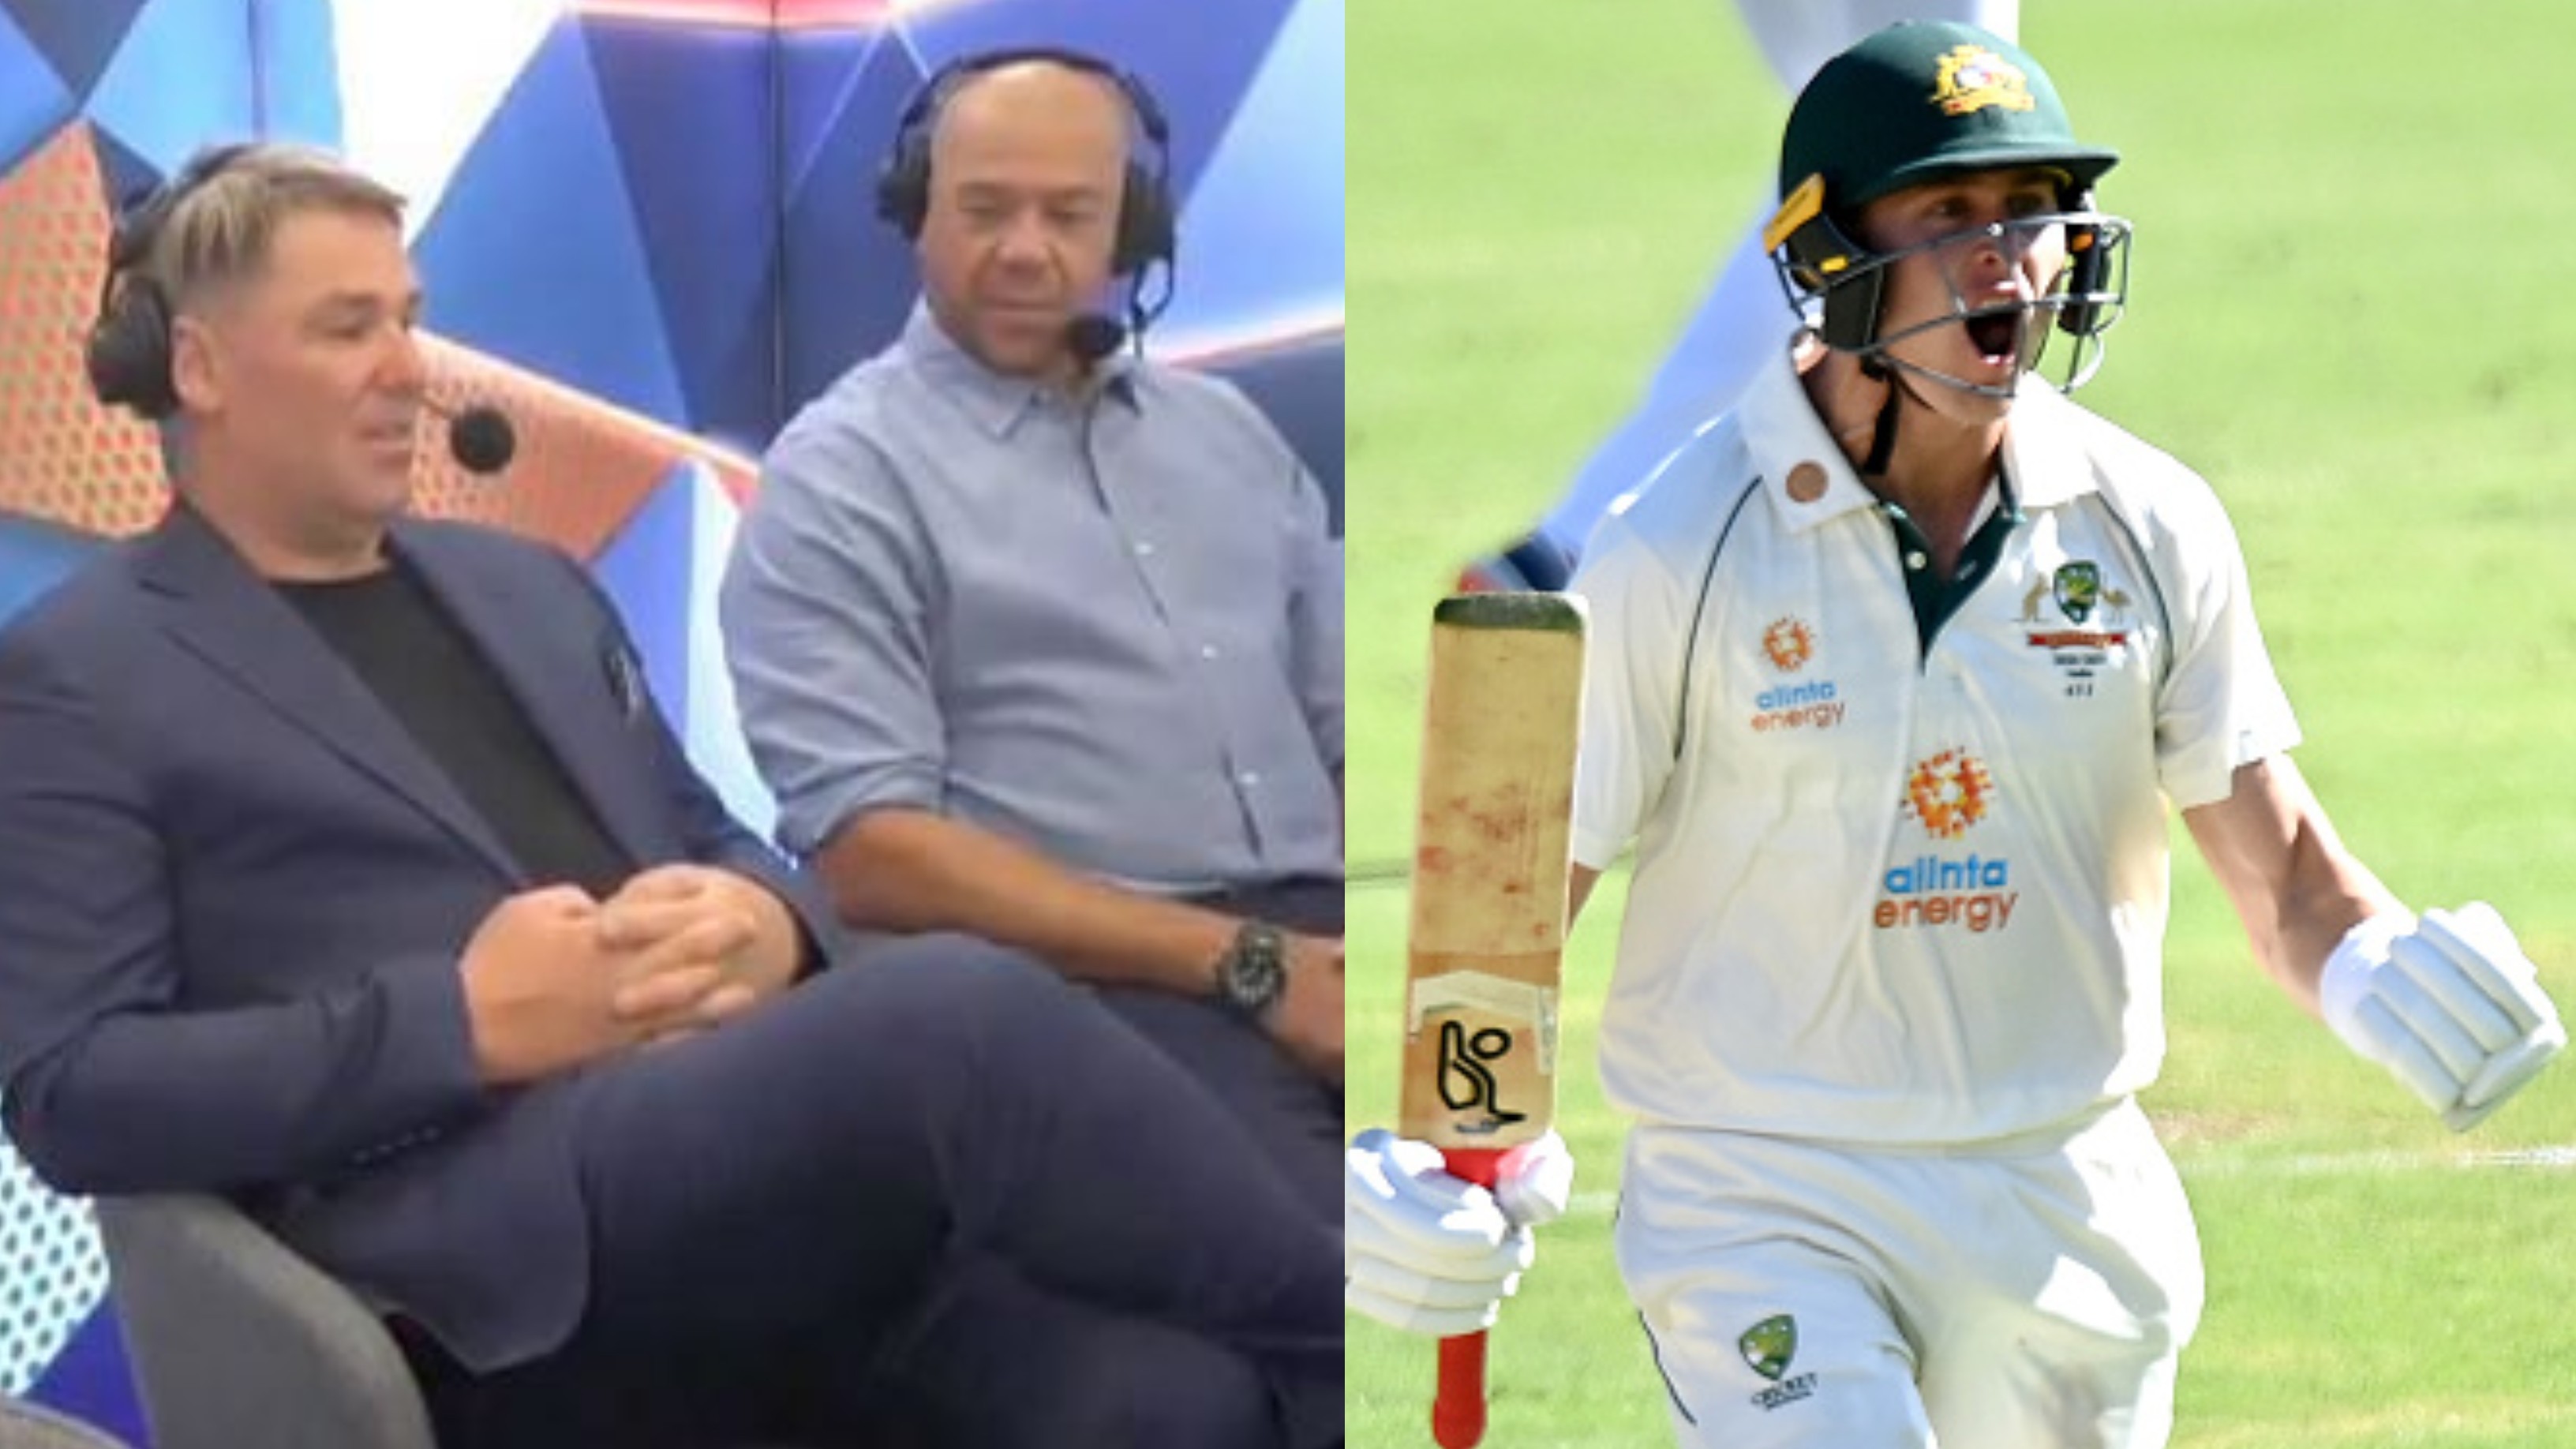 Warne and Symonds apologize to Labuschagne for their inappropriate on-air comments